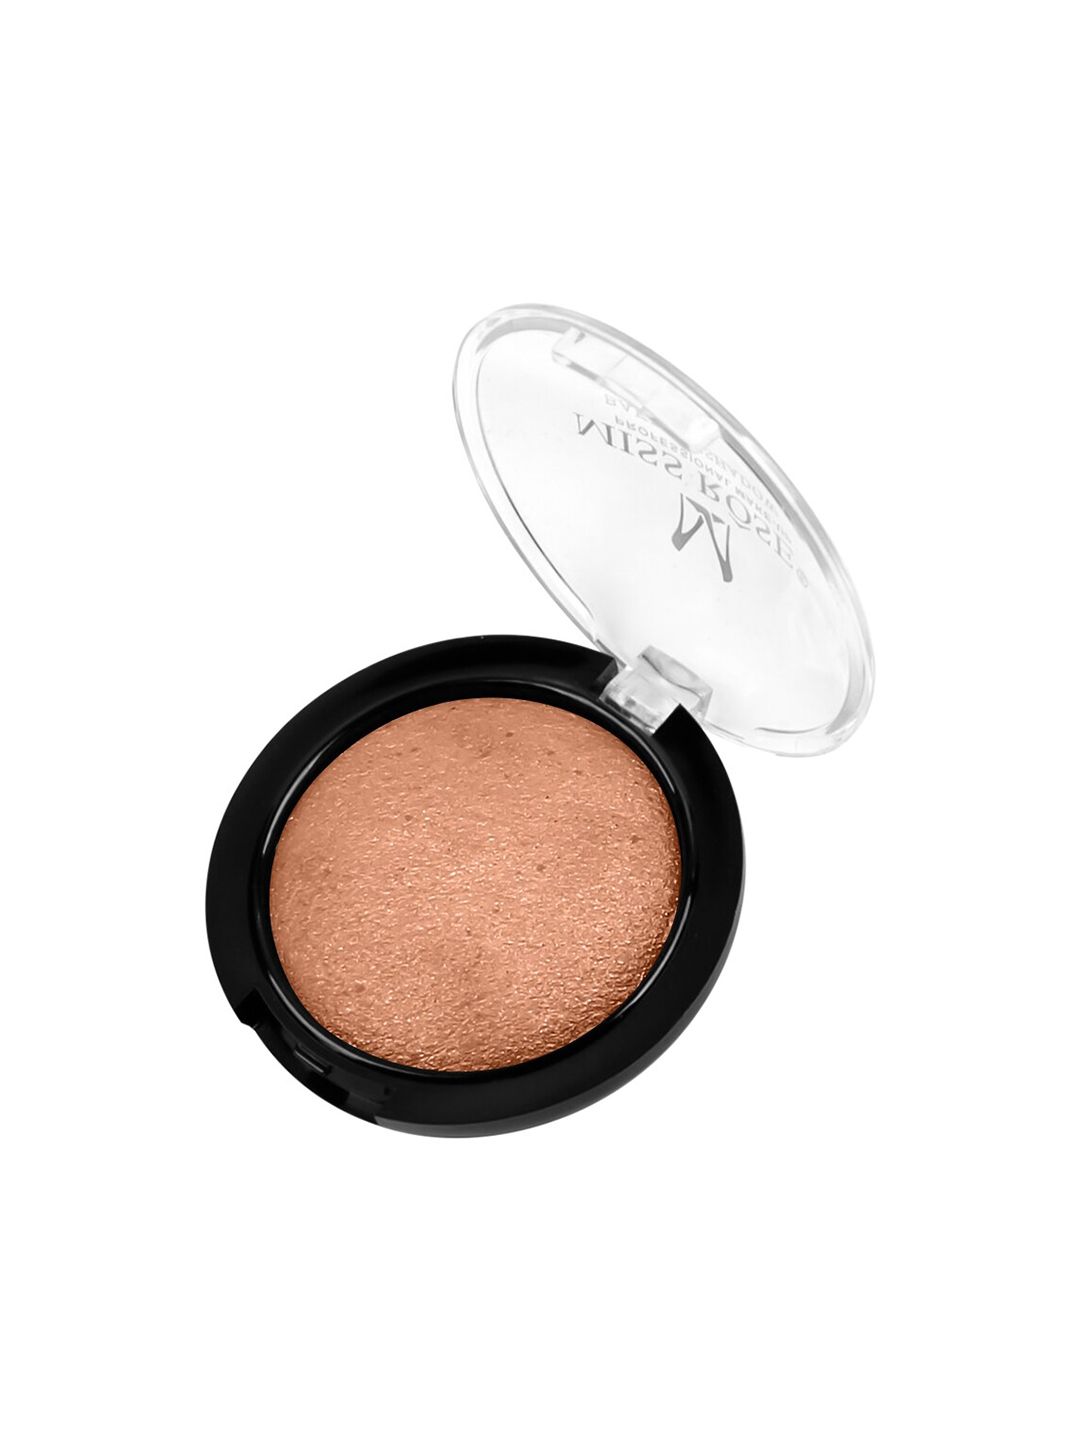 MISS ROSE MonochroMe Baked Eyeshadow 7001-073M 17 Price in India